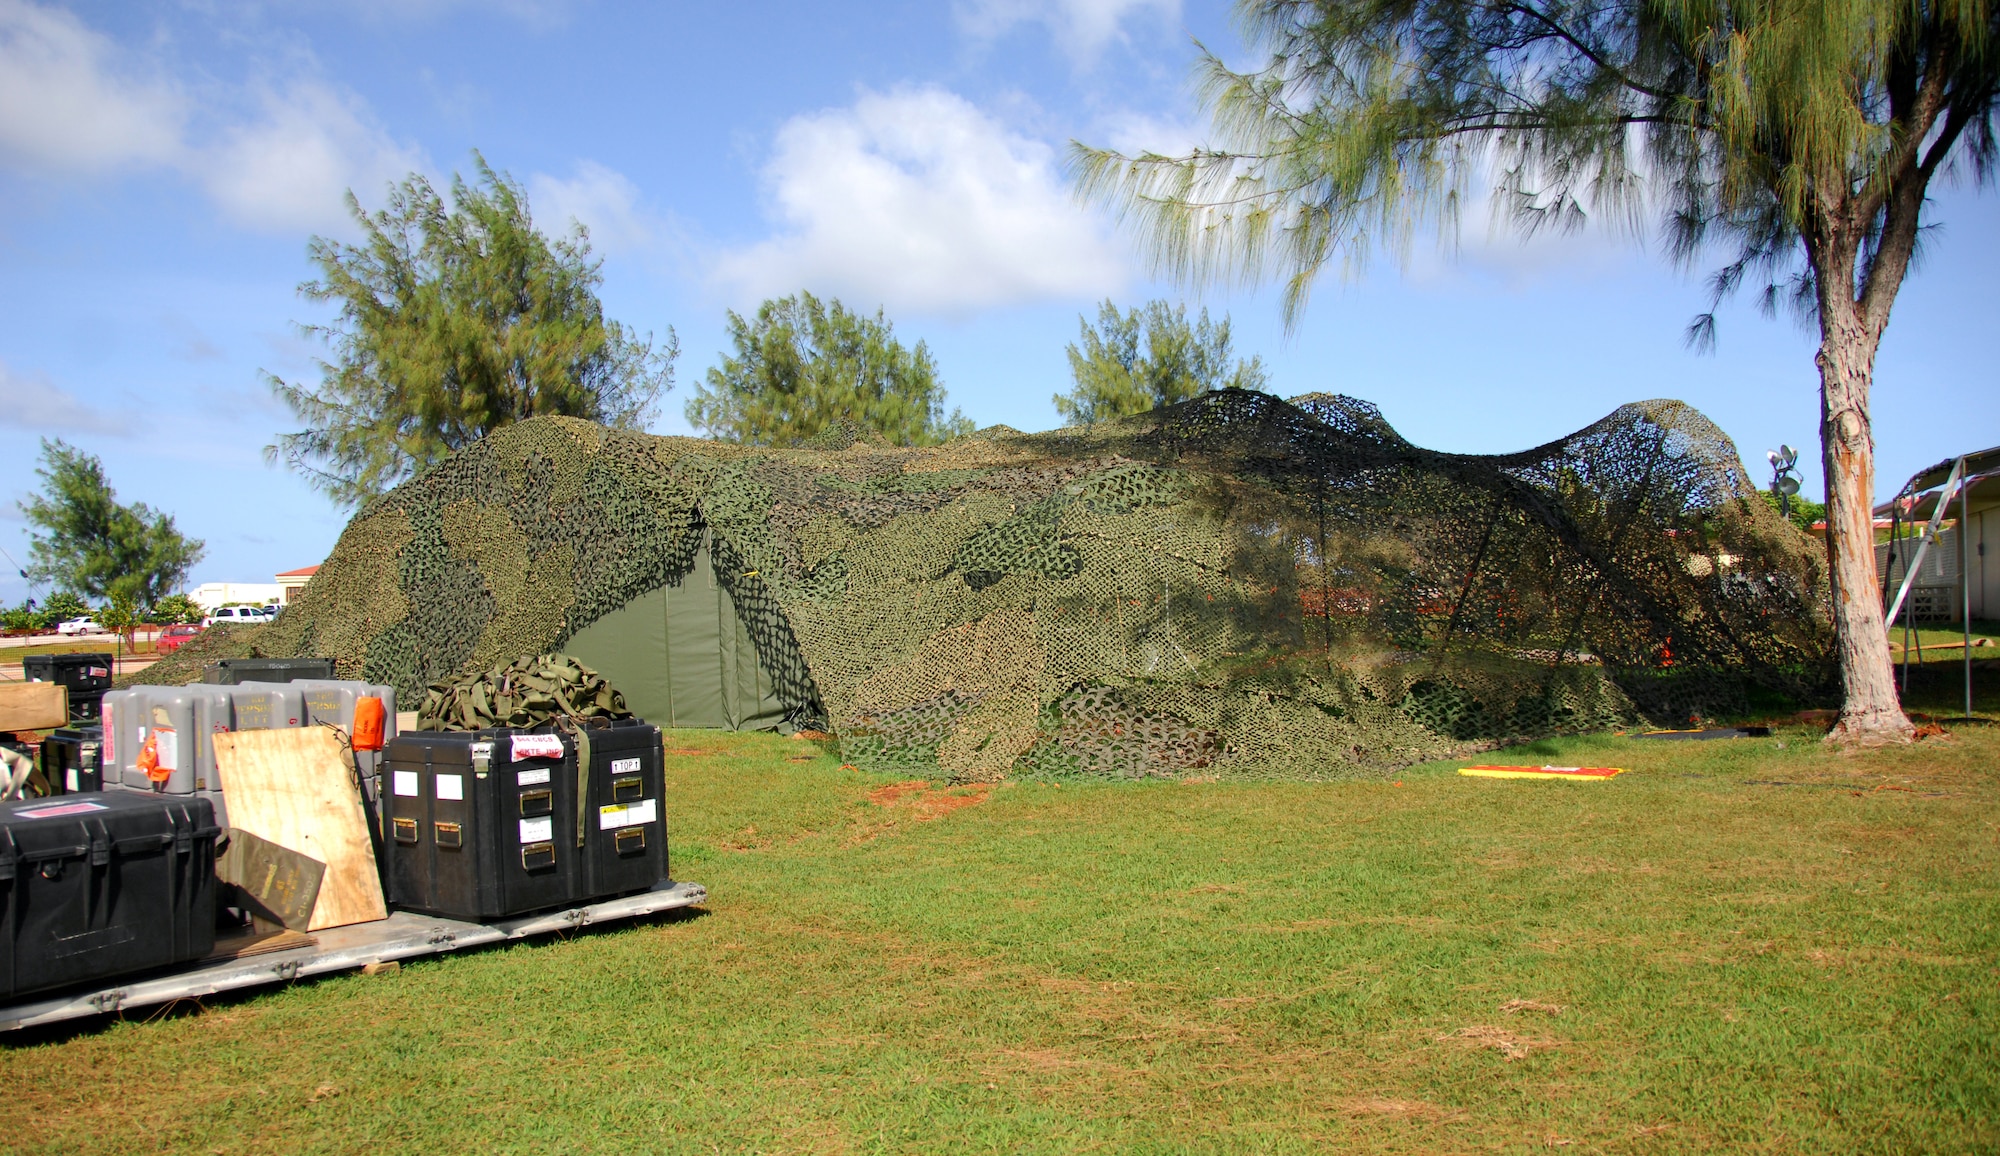 ANDERSEN AIR FORCE BASE, Guam - This tent served as the 644th Combat Communication Squadron's base of operations during the squadron's deployment to "Guamania" as part of the Dragon Thunder field training exercise Nov. 20 here. Airmen from the 644th CBCS set up the deployed location during the Phase I exercise held Nov. 12-14. (U.S. Air Force photo by Senior Airman Shane Dunaway)